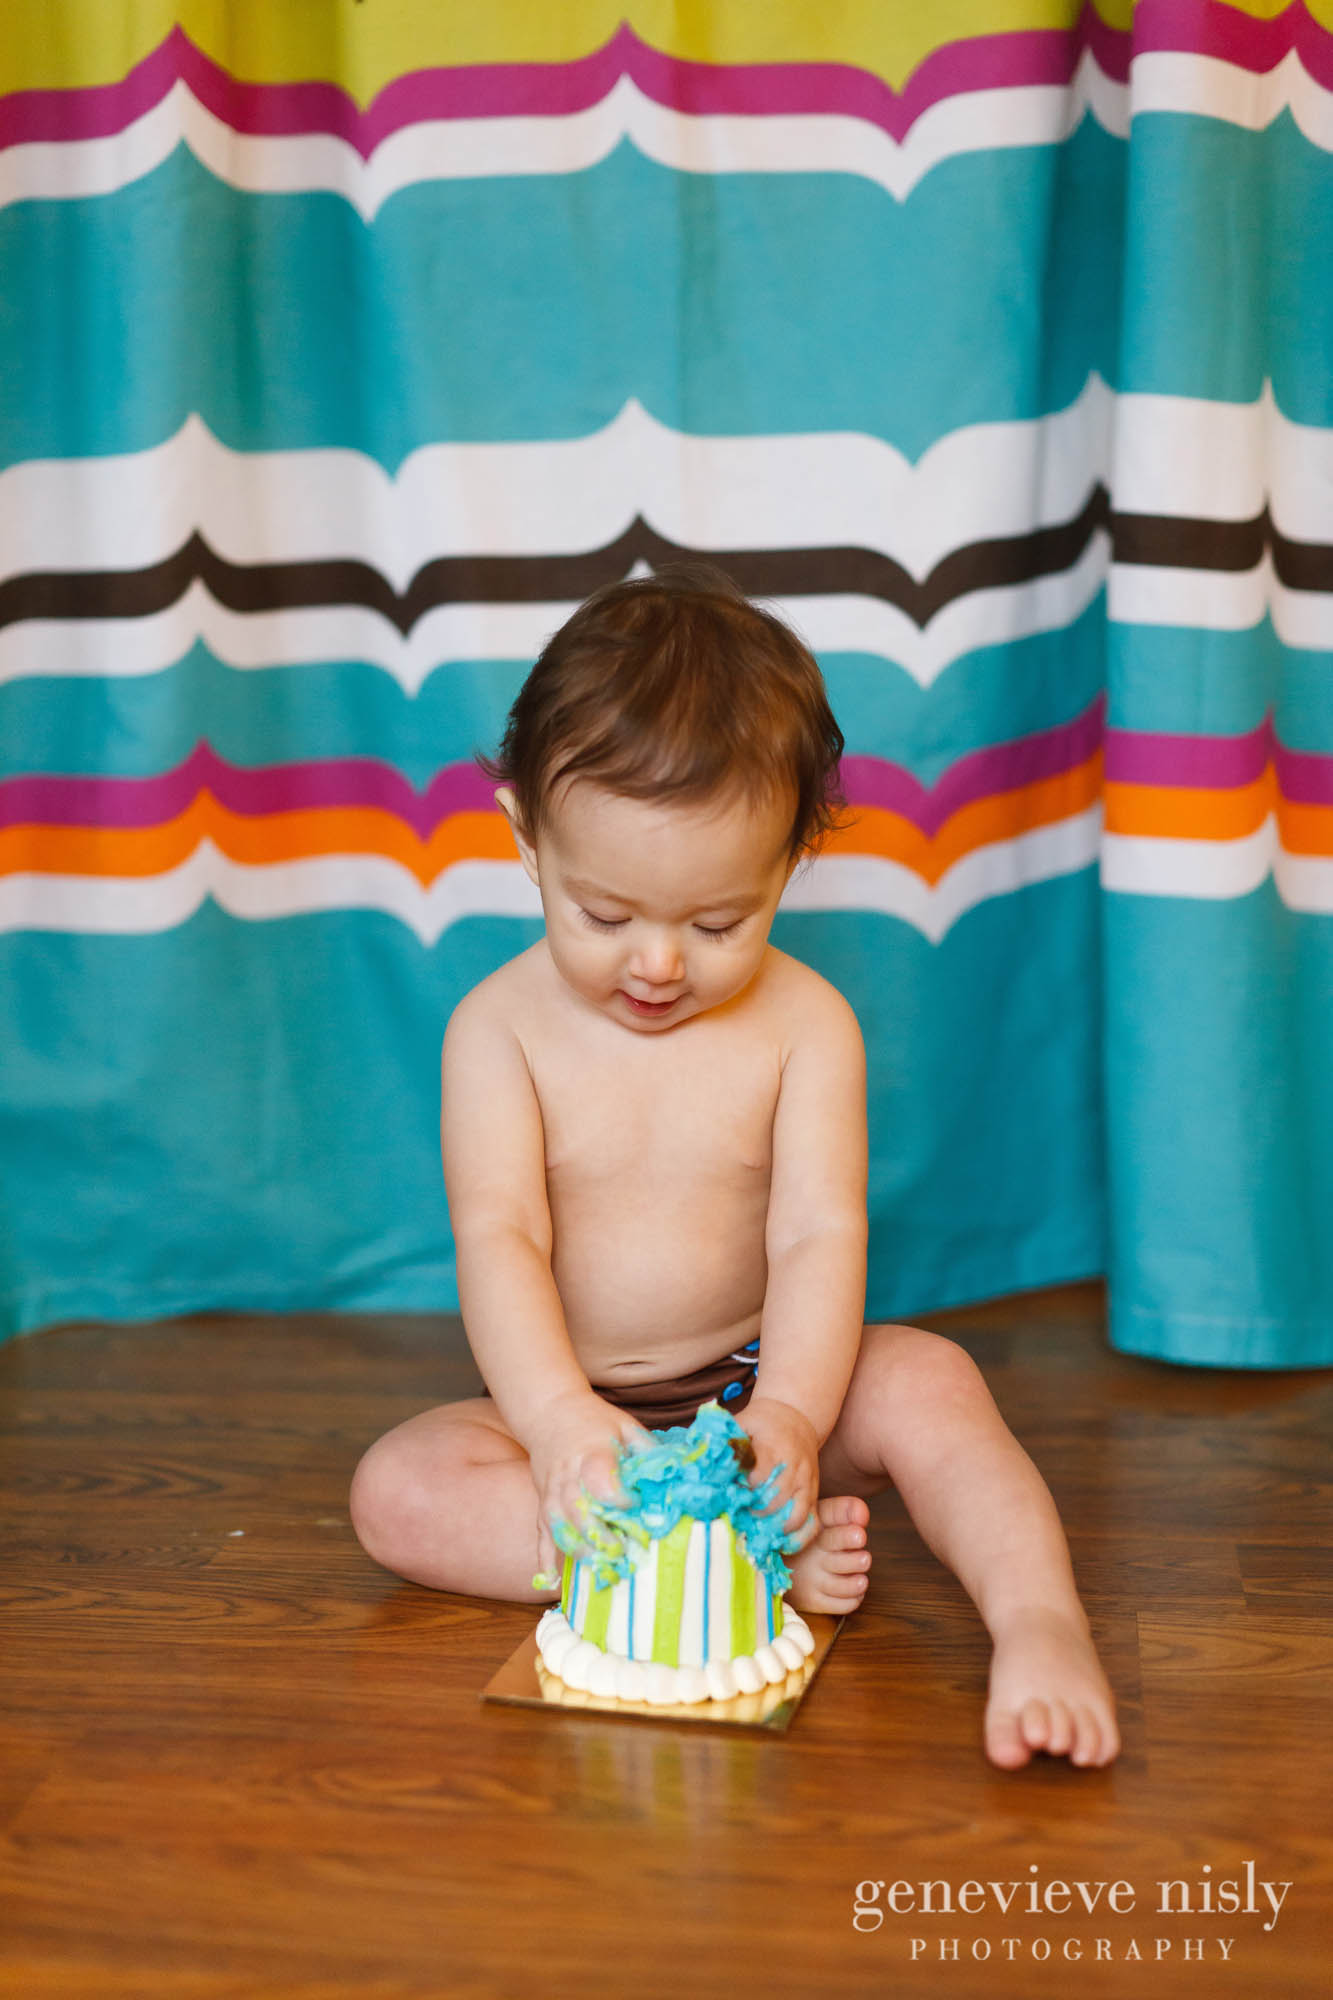 kael-birthday-005-private-residence-stow-portrait-photographer-genevieve-nisly-photography